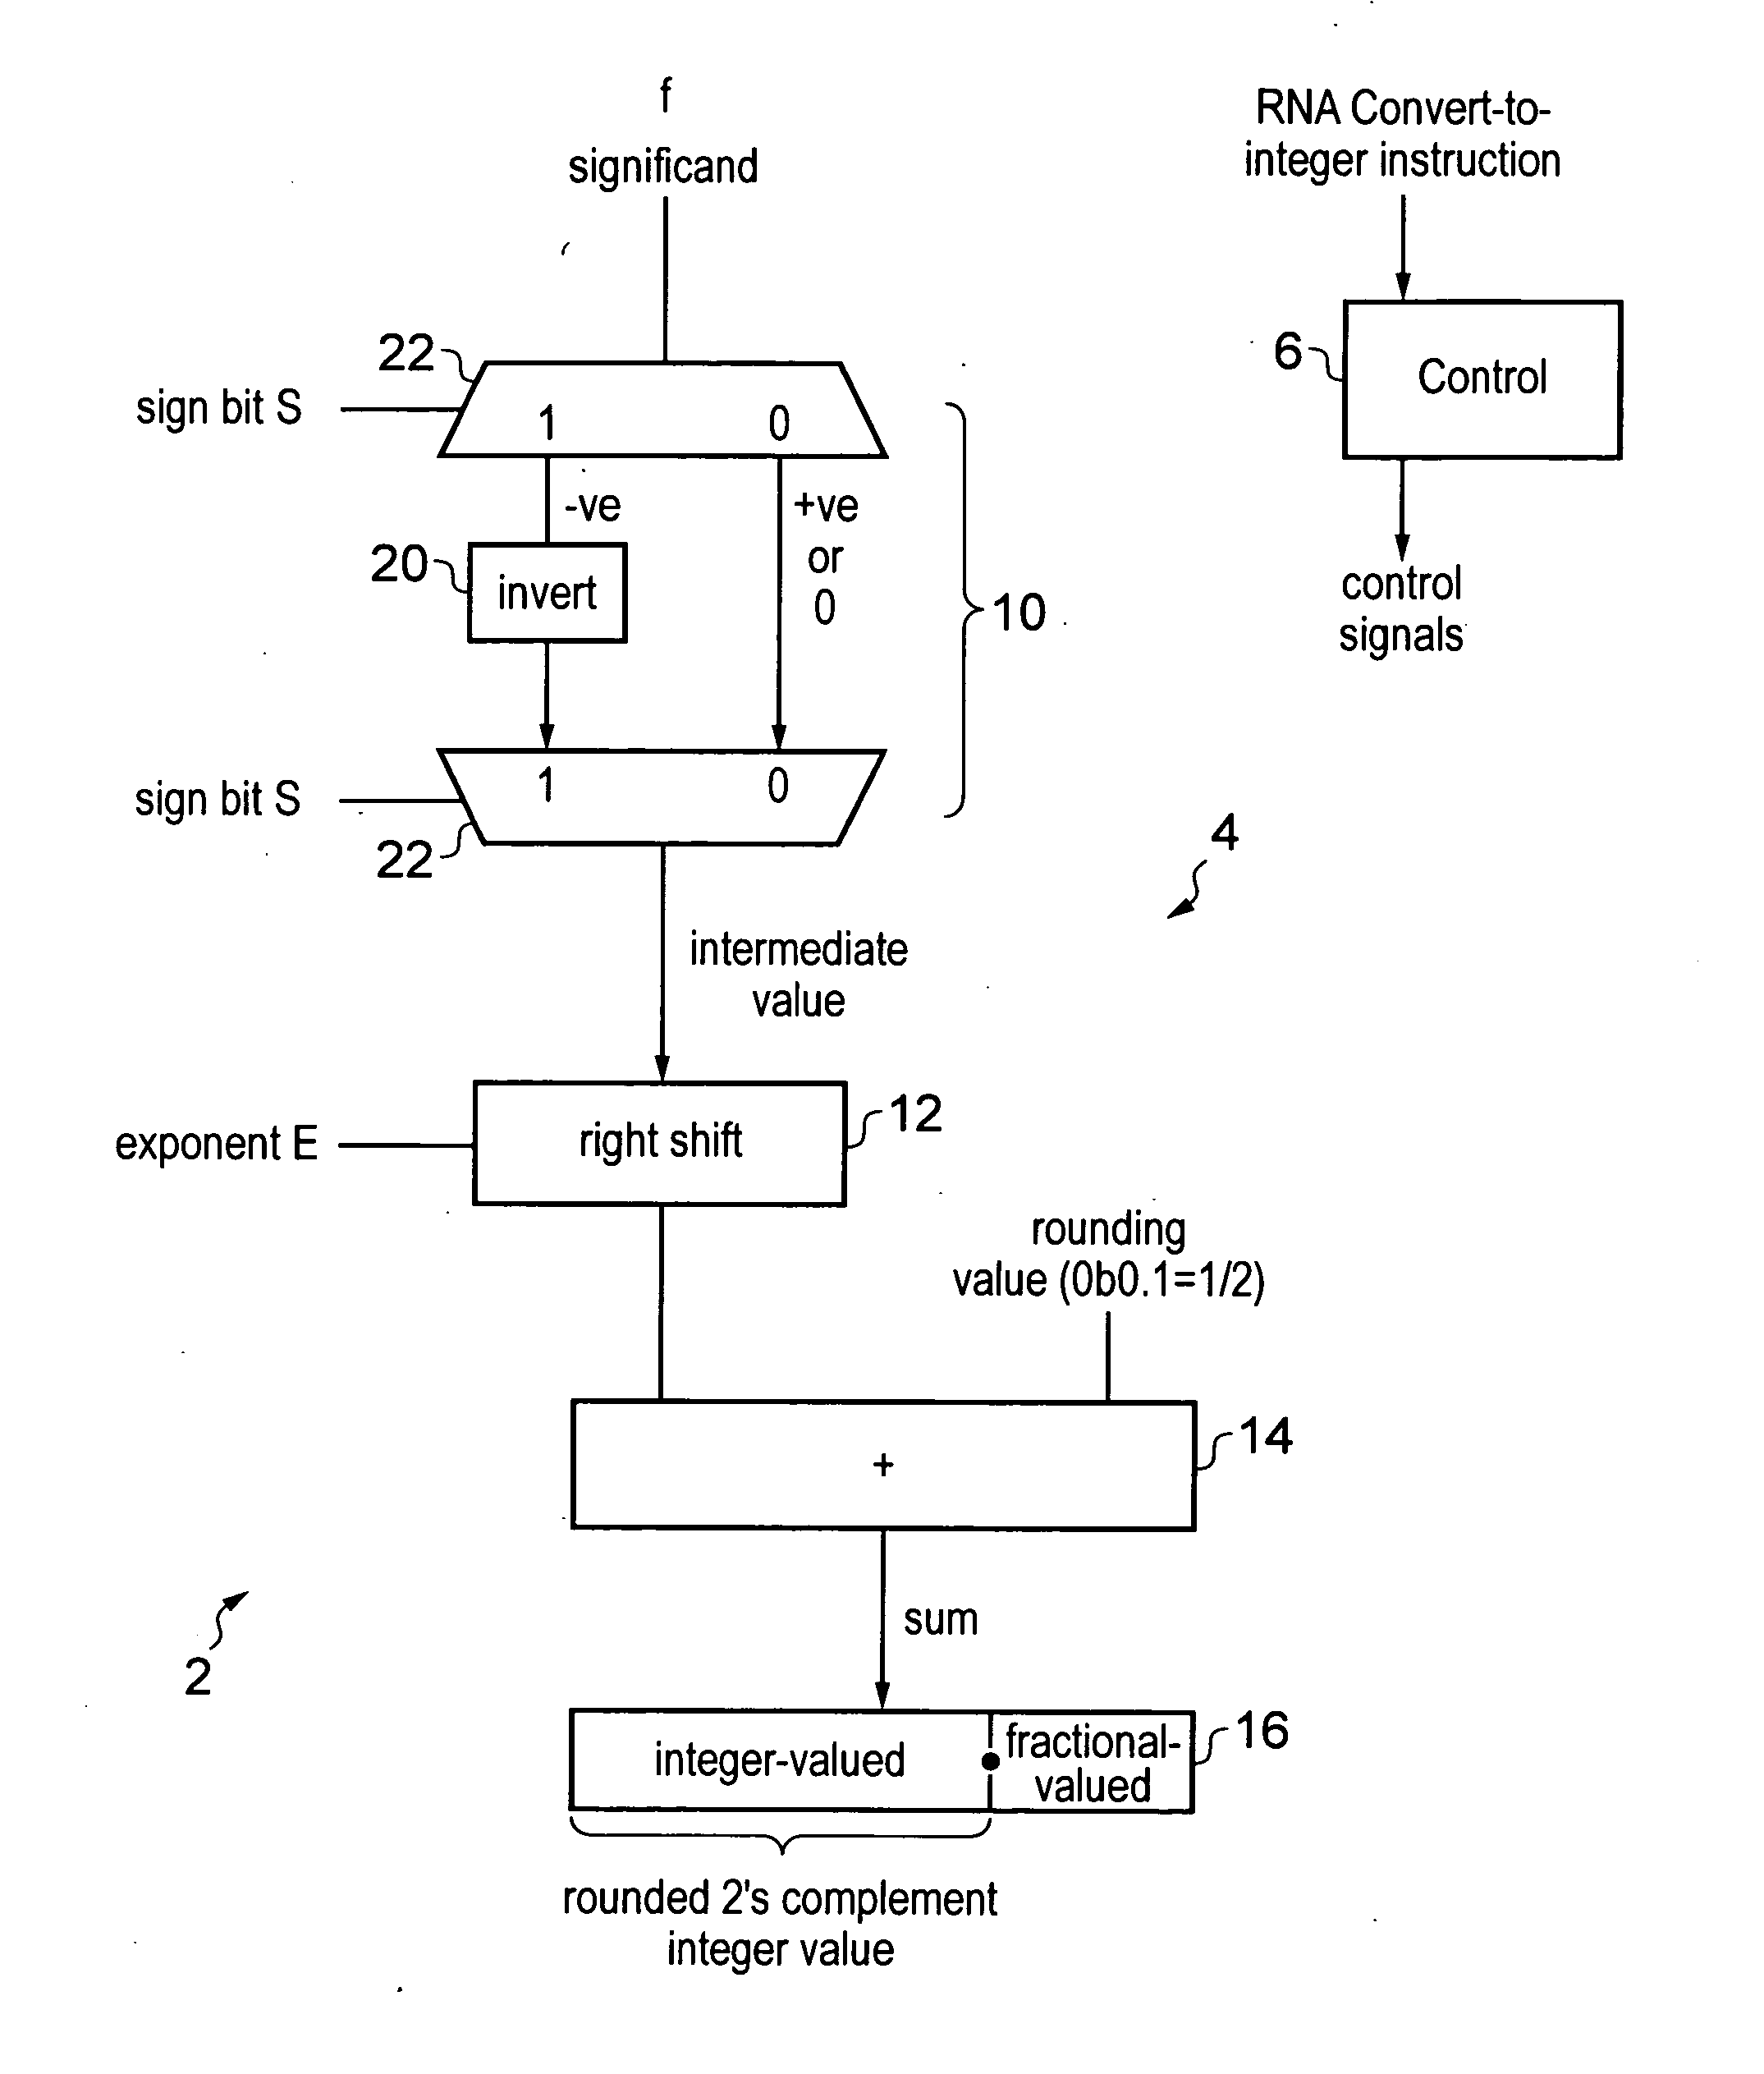 Apparatus and method for performing a convert-to-integer operation